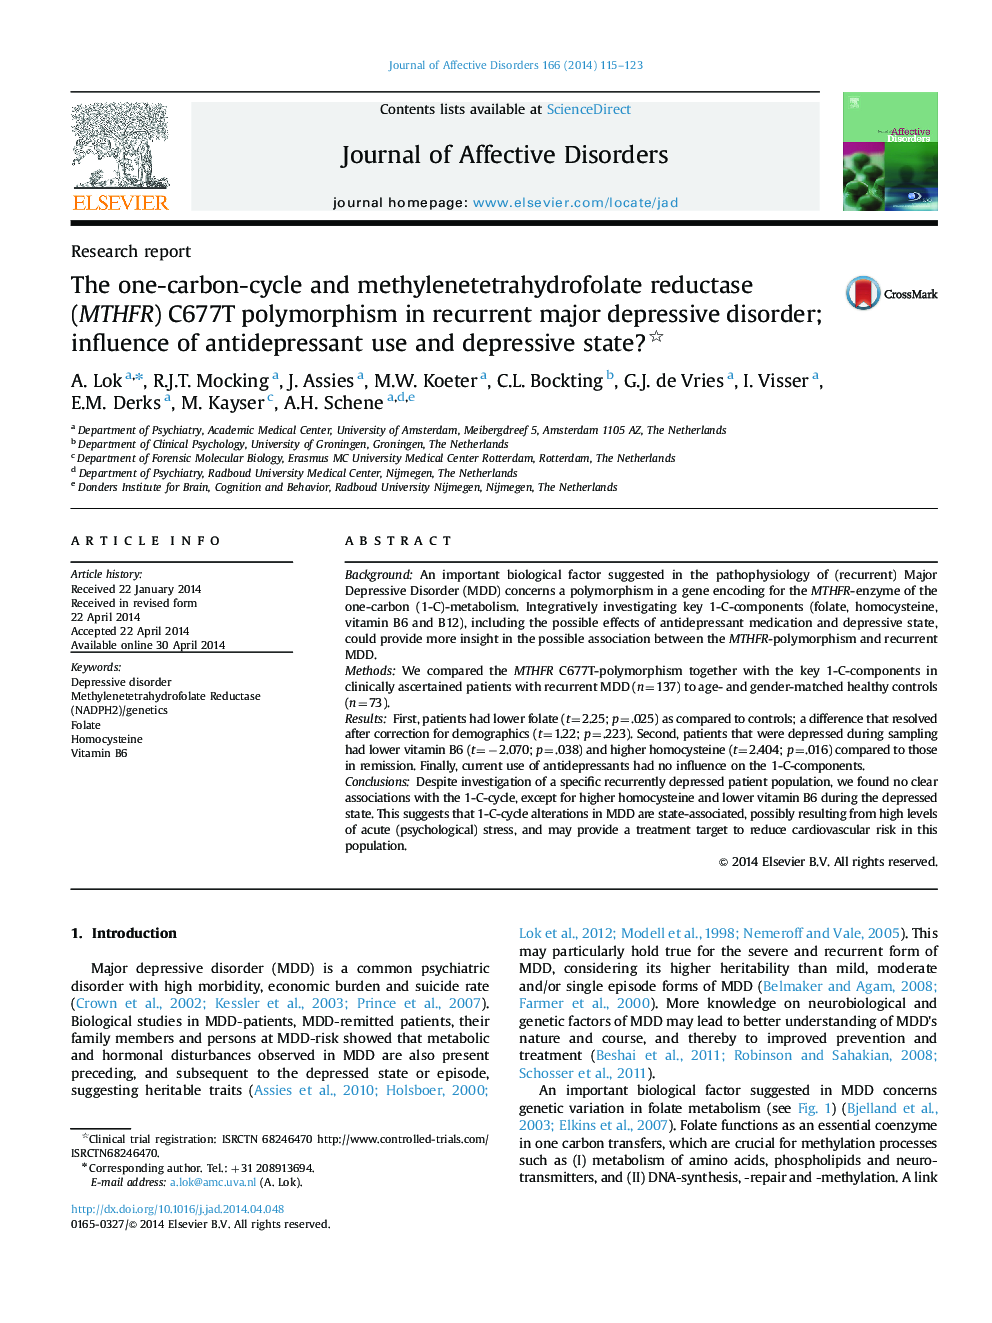 The one-carbon-cycle and methylenetetrahydrofolate reductase (MTHFR) C677T polymorphism in recurrent major depressive disorder; influence of antidepressant use and depressive state?